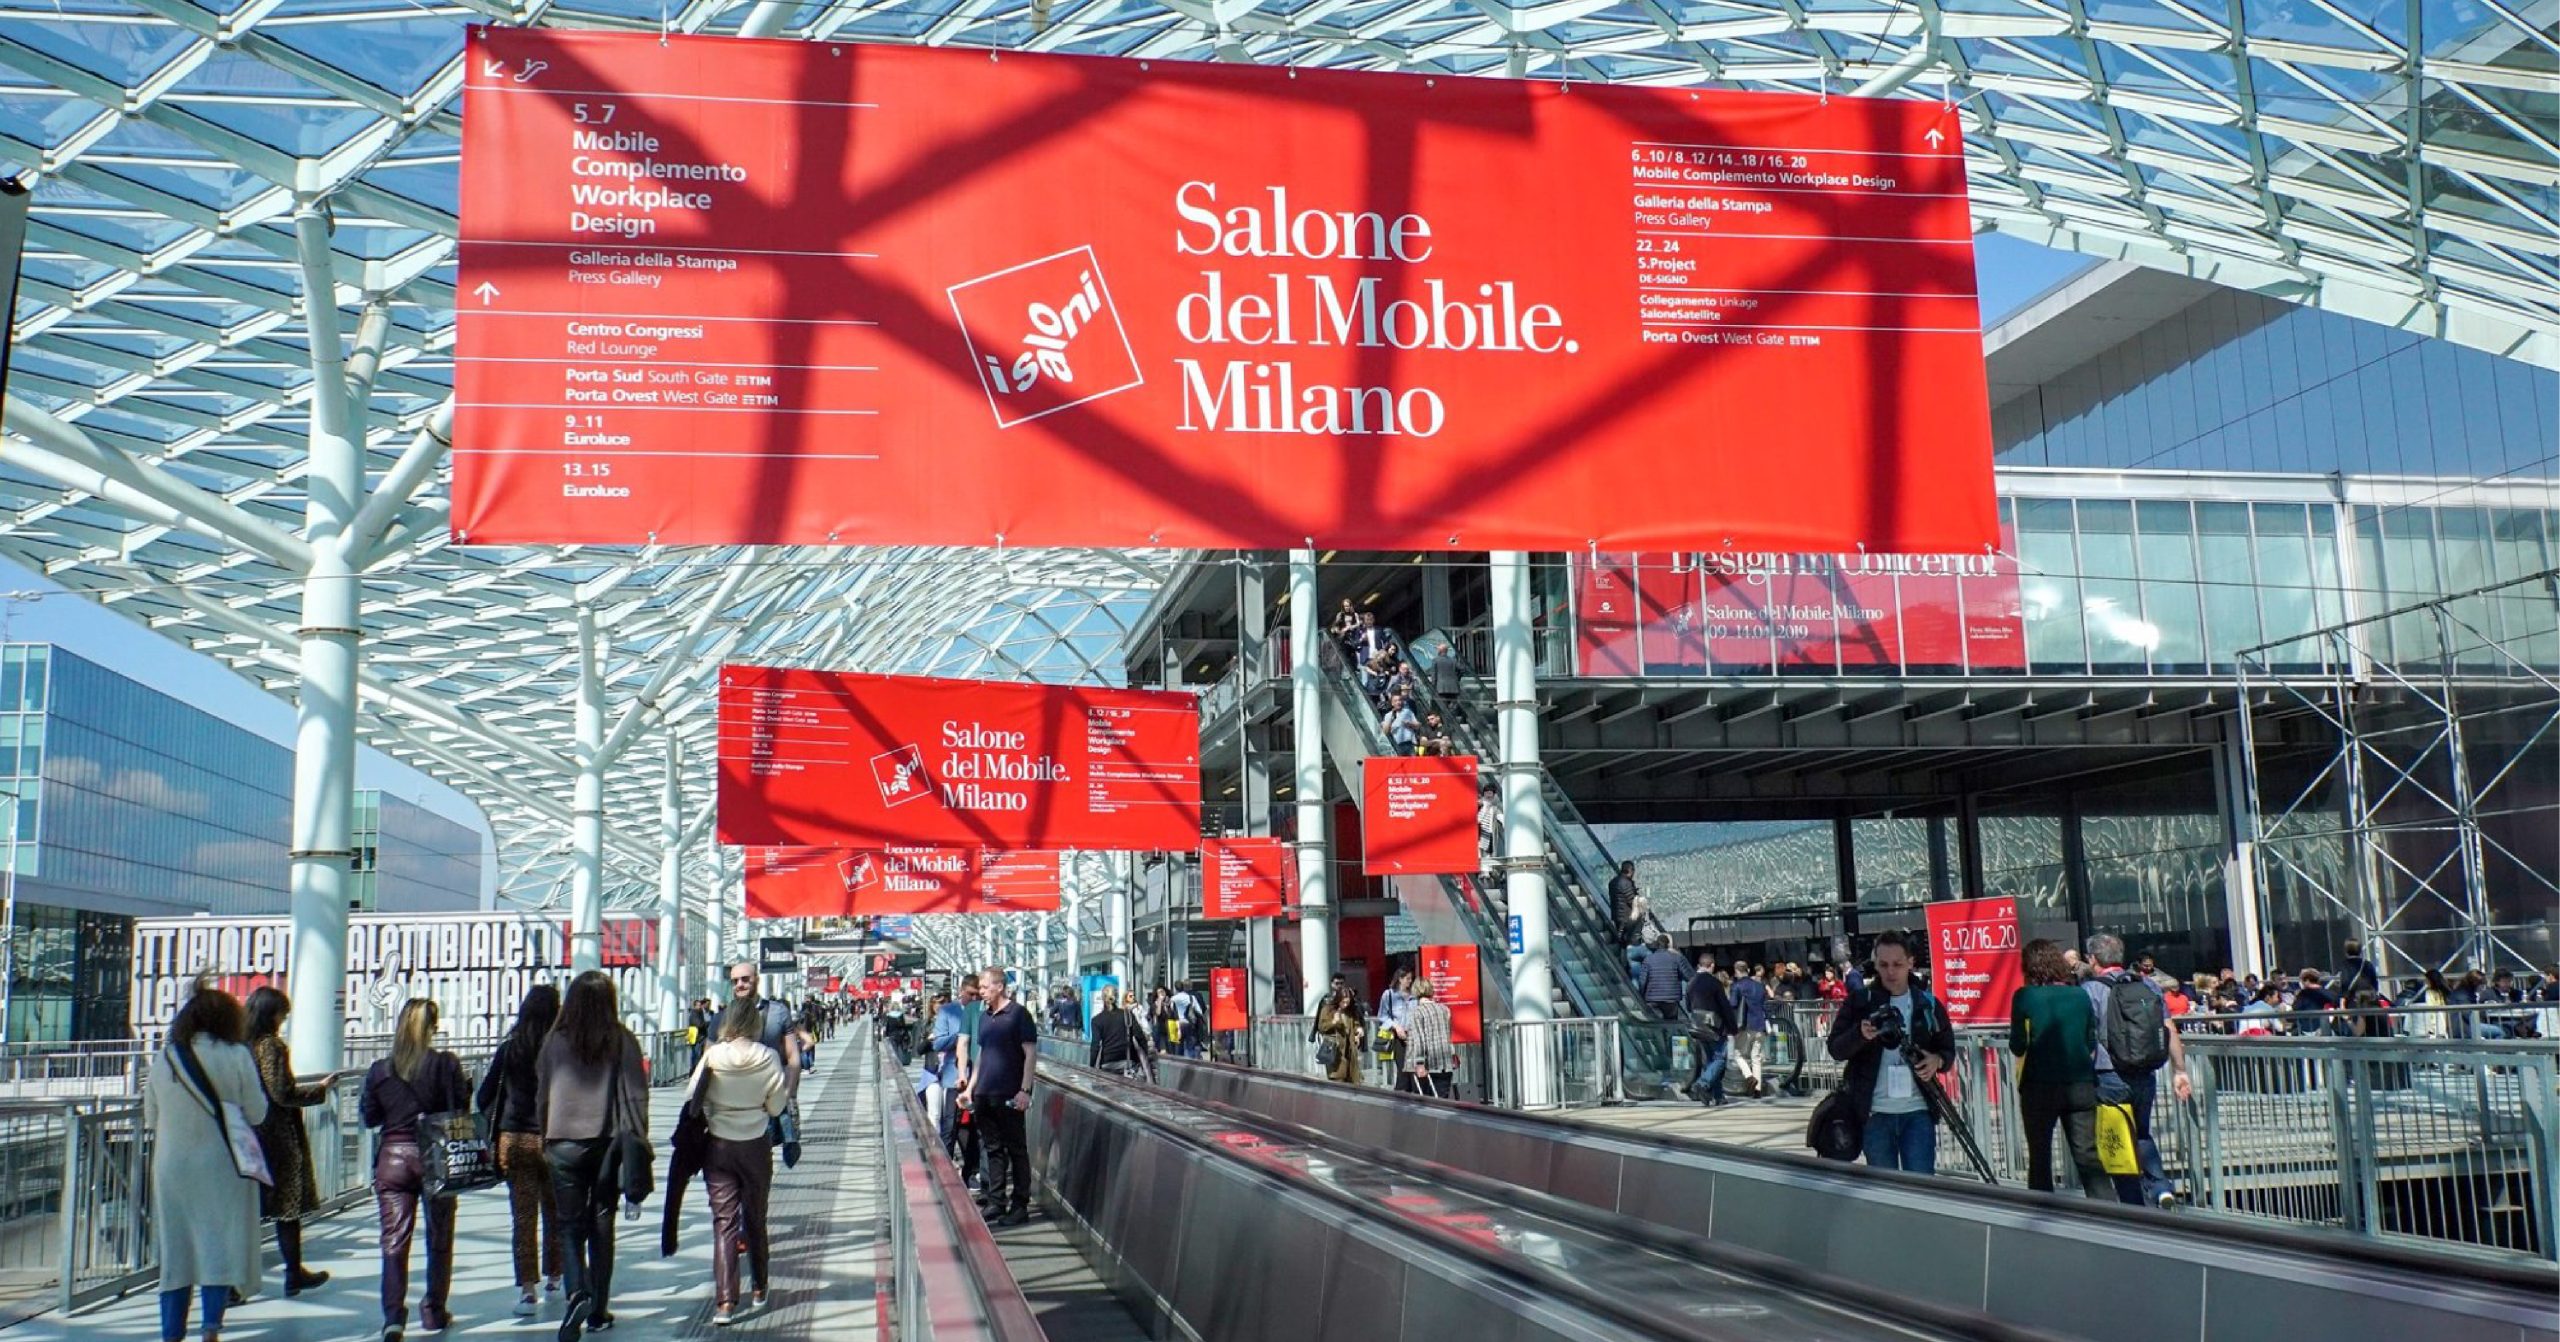 How to make your stand at Salone del Mobile 2022 unforgettable?